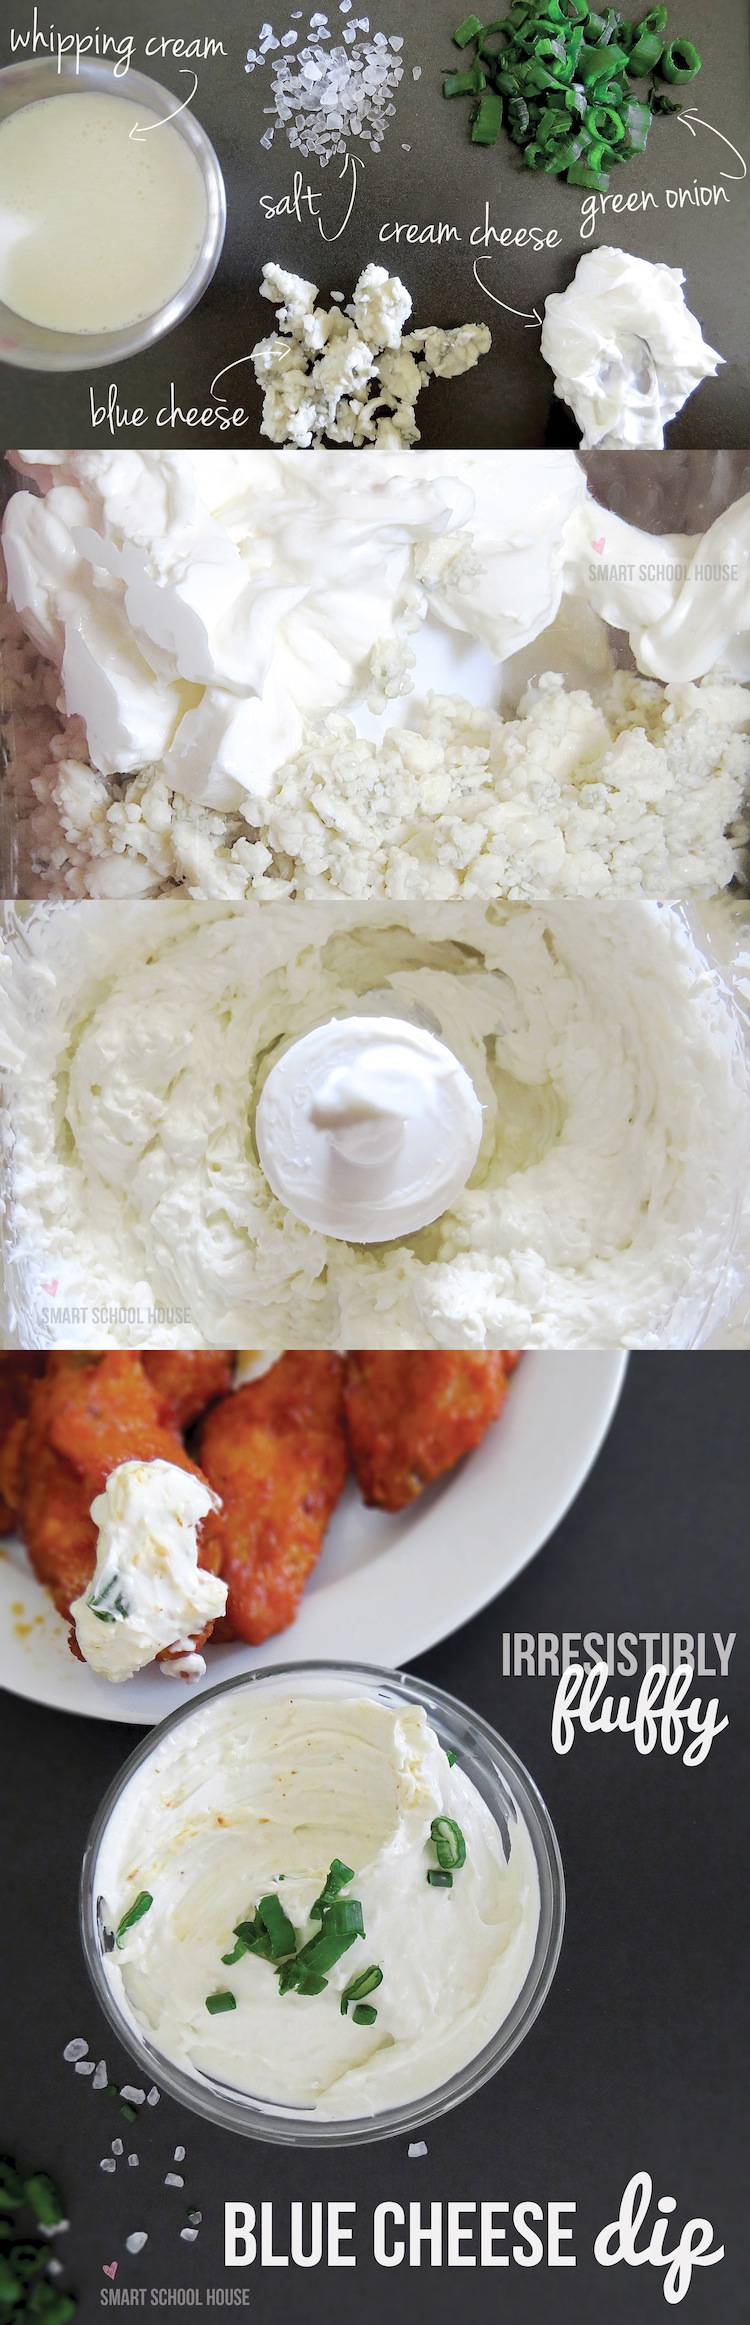 How to make an irresistibly fluffy blue cheese dip!